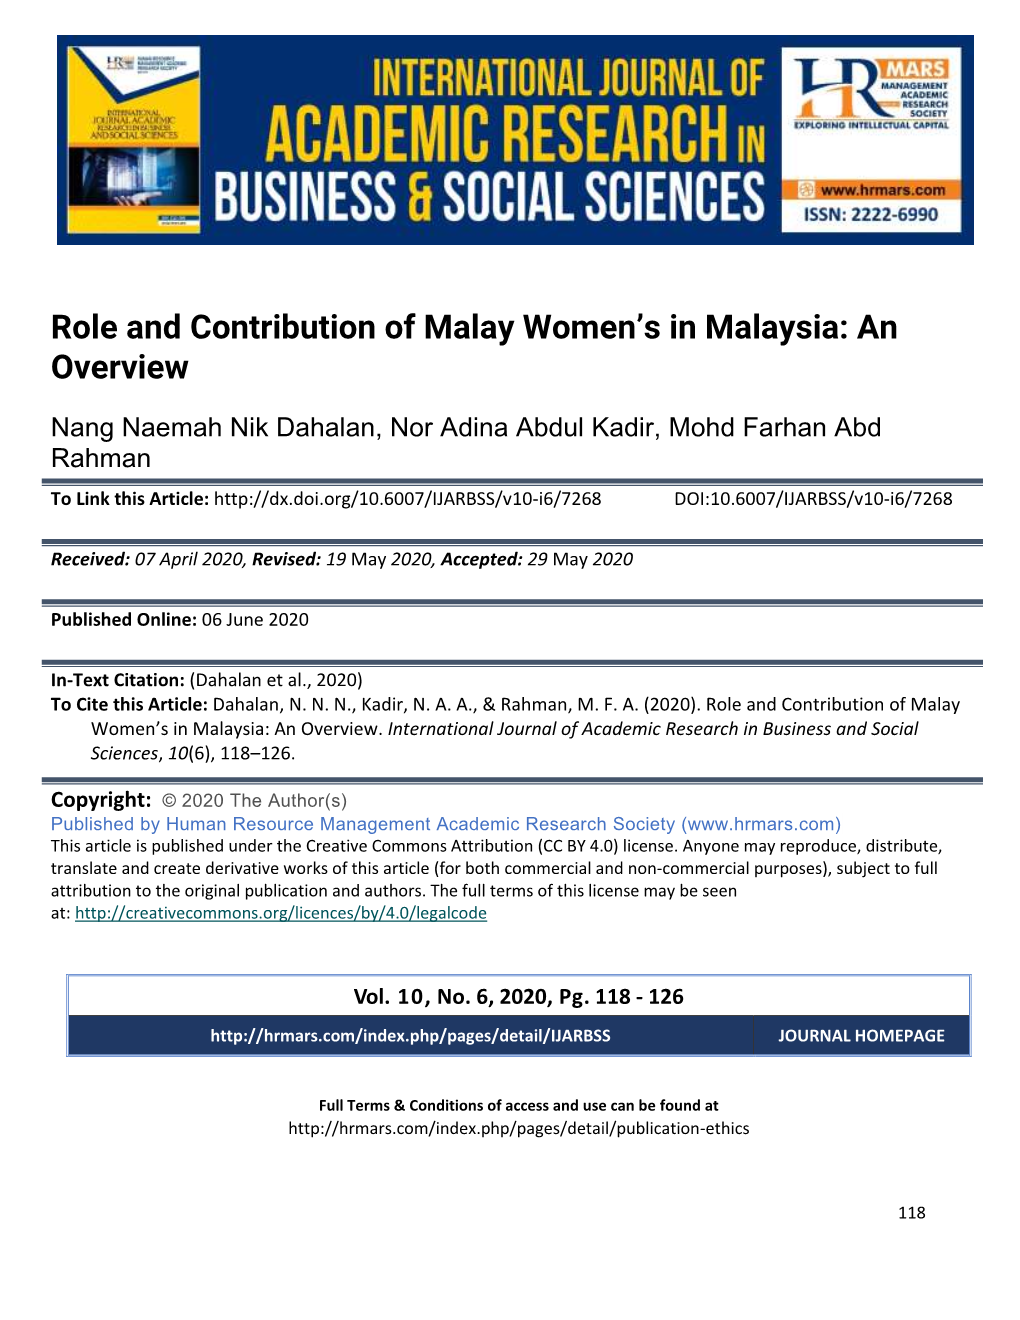 Role and Contribution of Malay Women's in Malaysia: an Overview